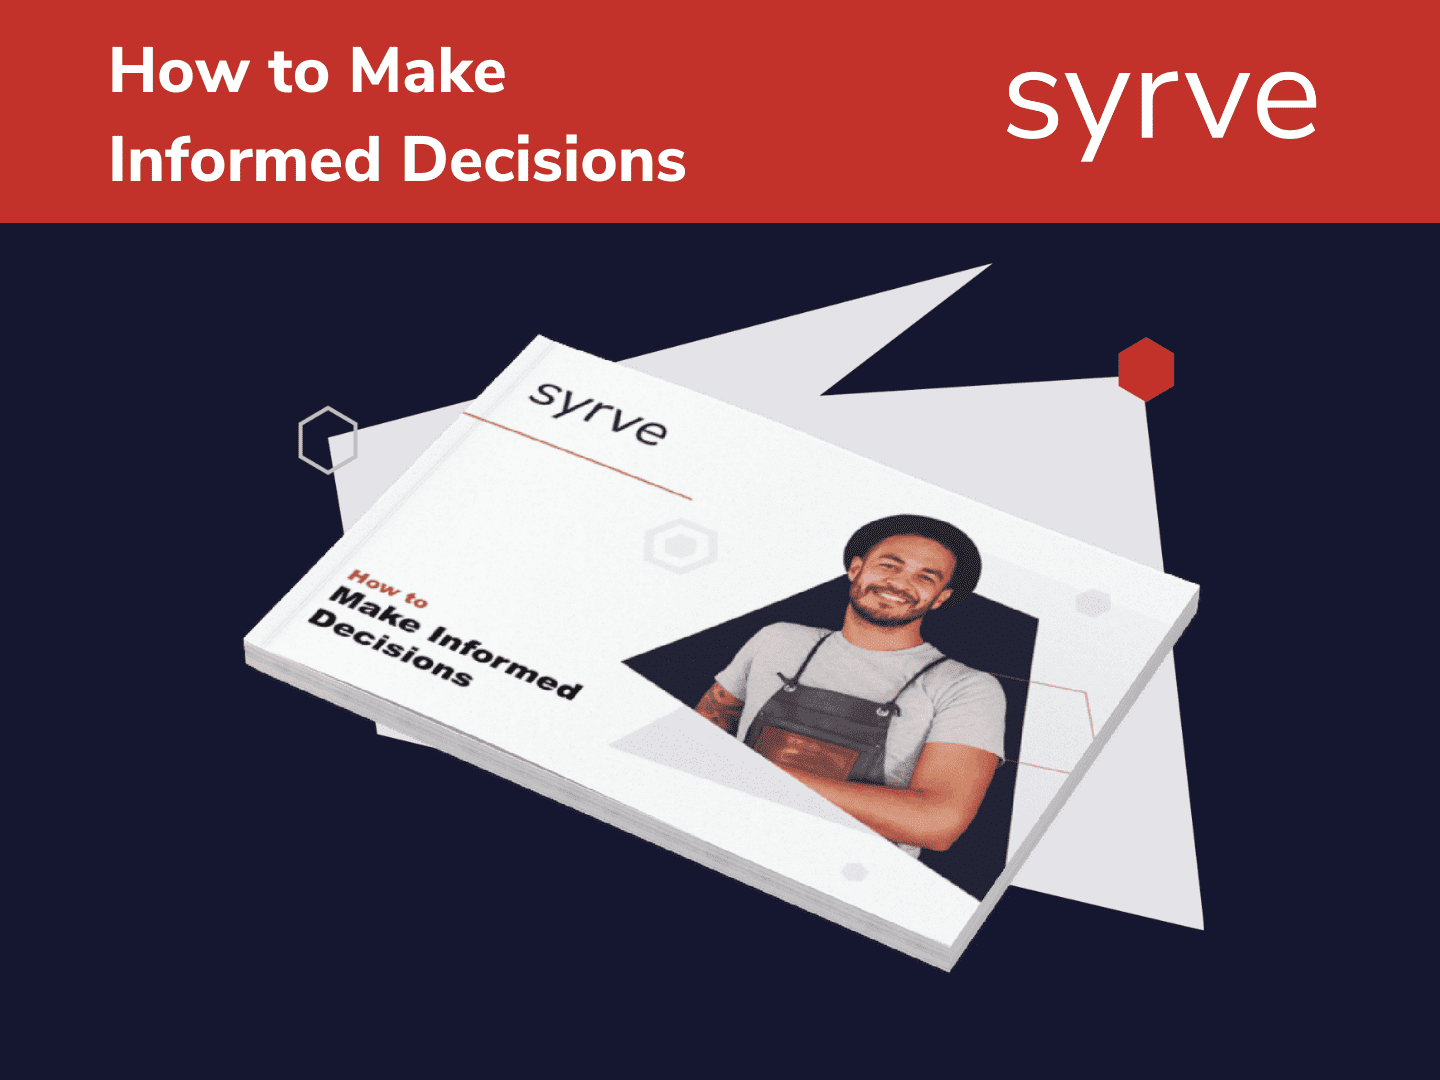 How to Make Informed Decisions